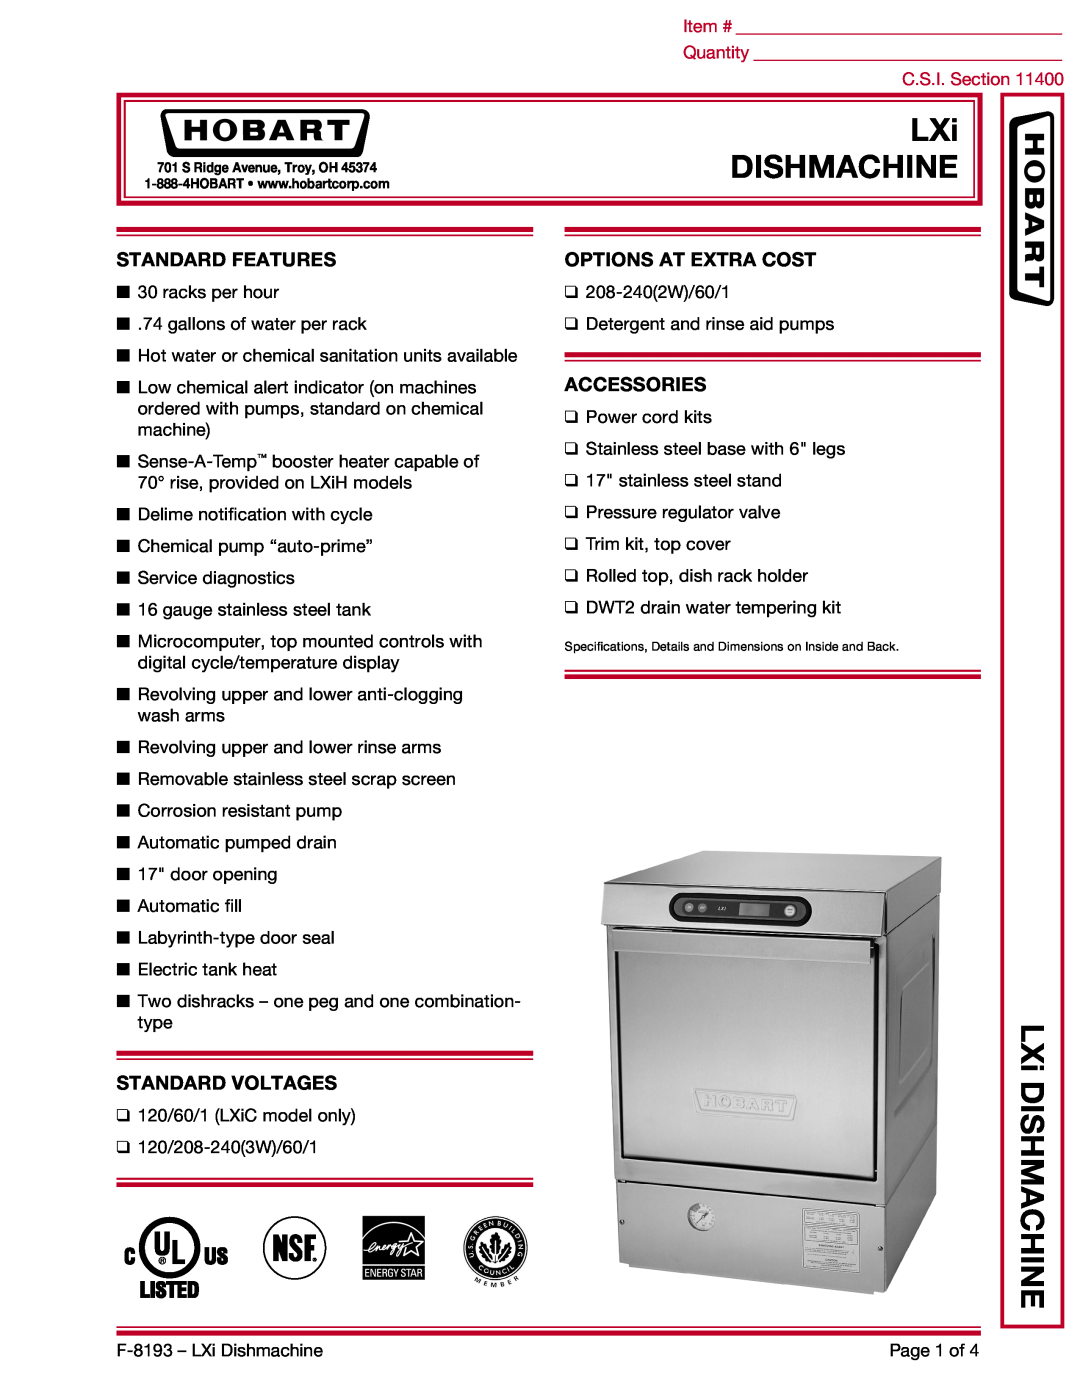 Hobart LXI specifications Dishmachine, LXi DISHMACHINE, Standard Features, Options At Extra Cost, Standard Voltages 